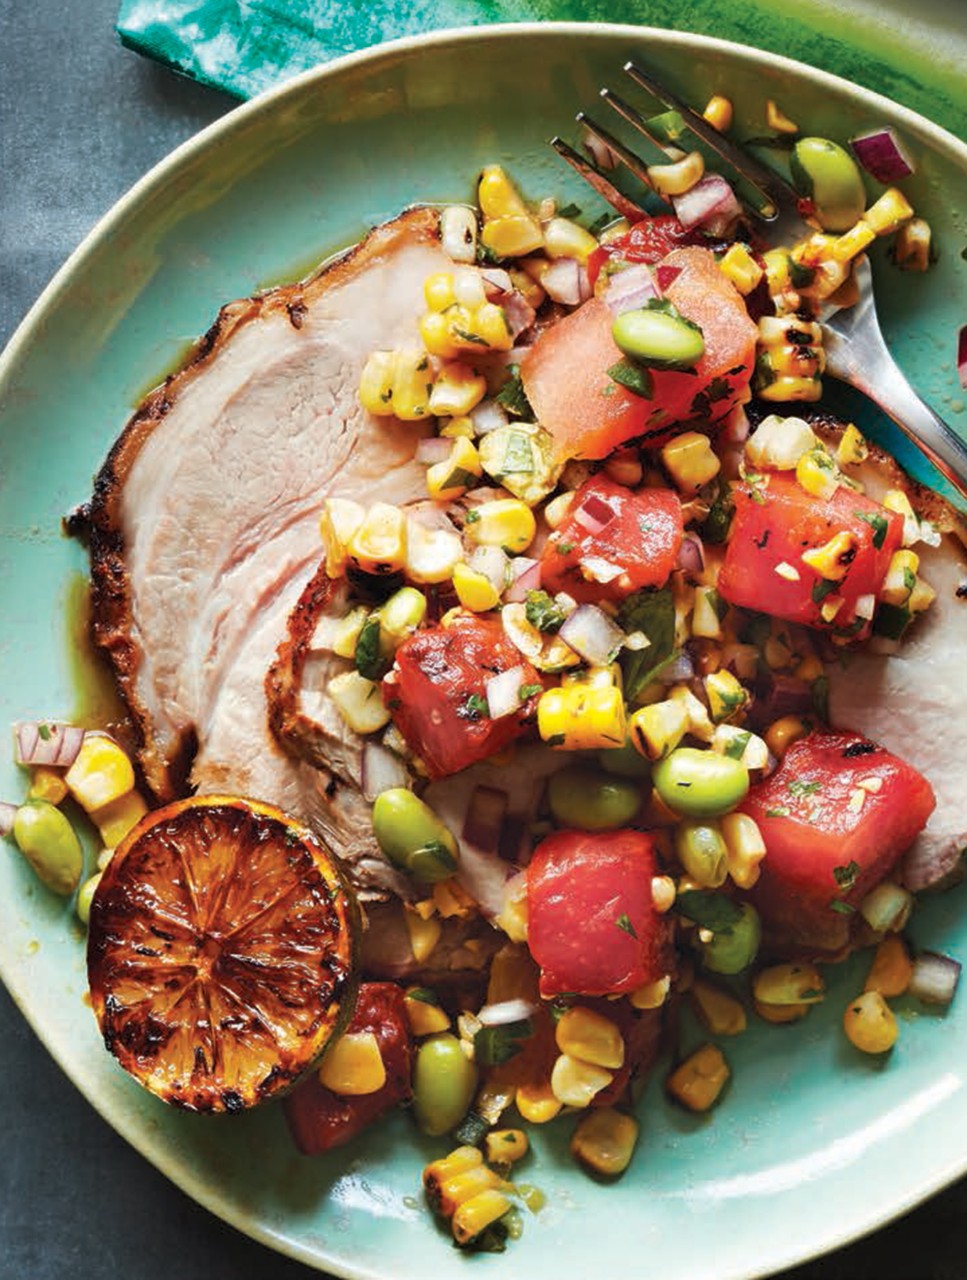 Grilled Pork Loin with Grilled Watermelon, Grilled Corn, Edamame & Lime Salsa